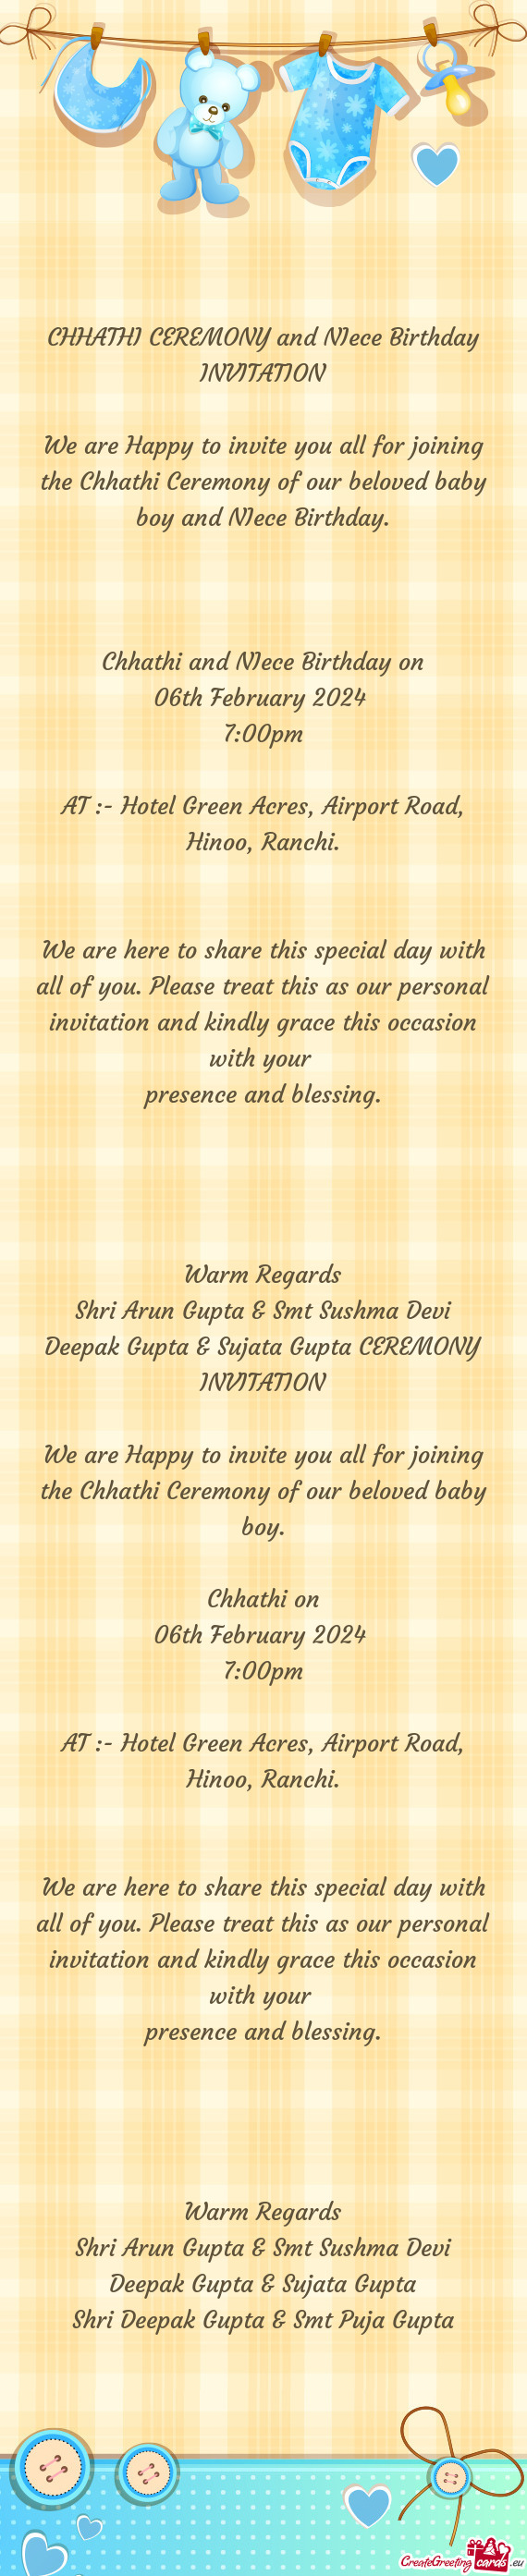 We are Happy to invite you all for joining the Chhathi Ceremony of our beloved baby boy and NIece Bi